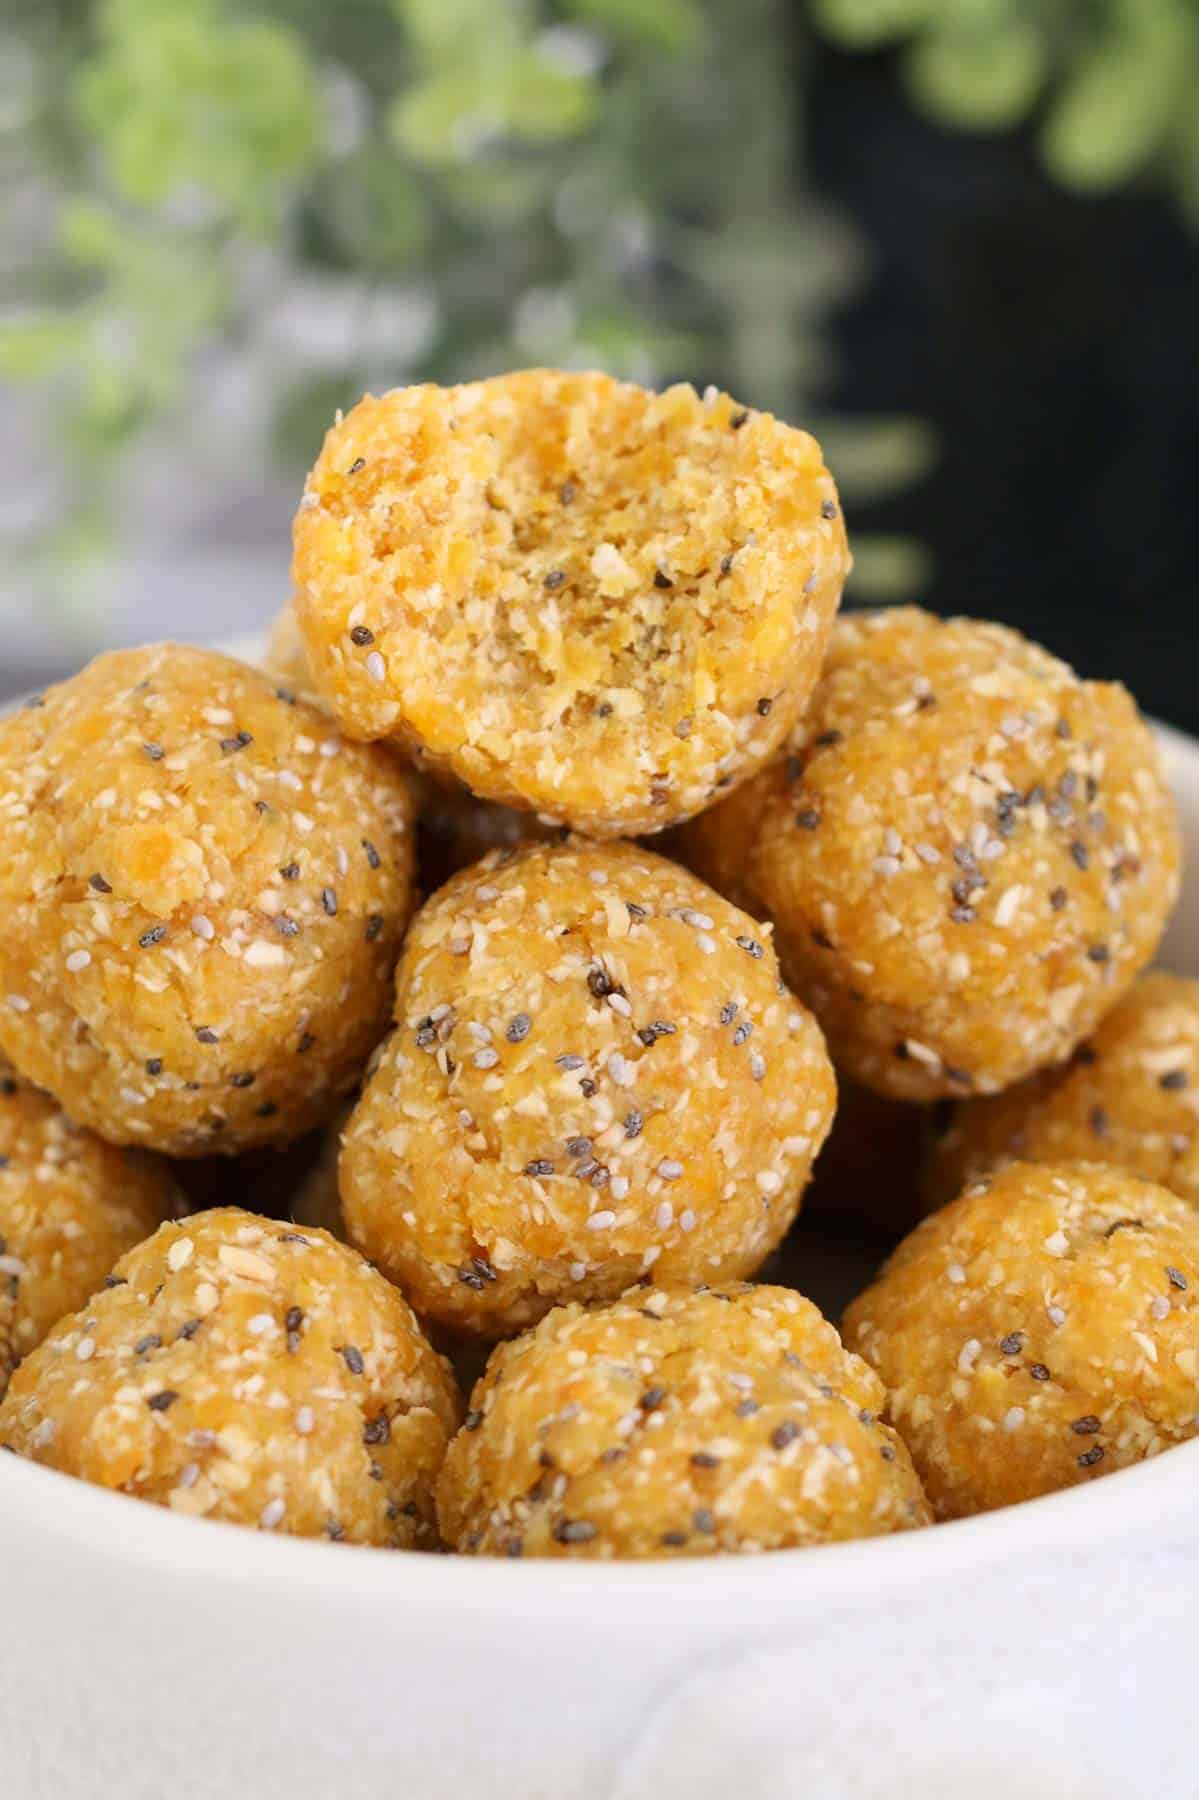 A close up of a pile of healthy protein balls with chia seeds.